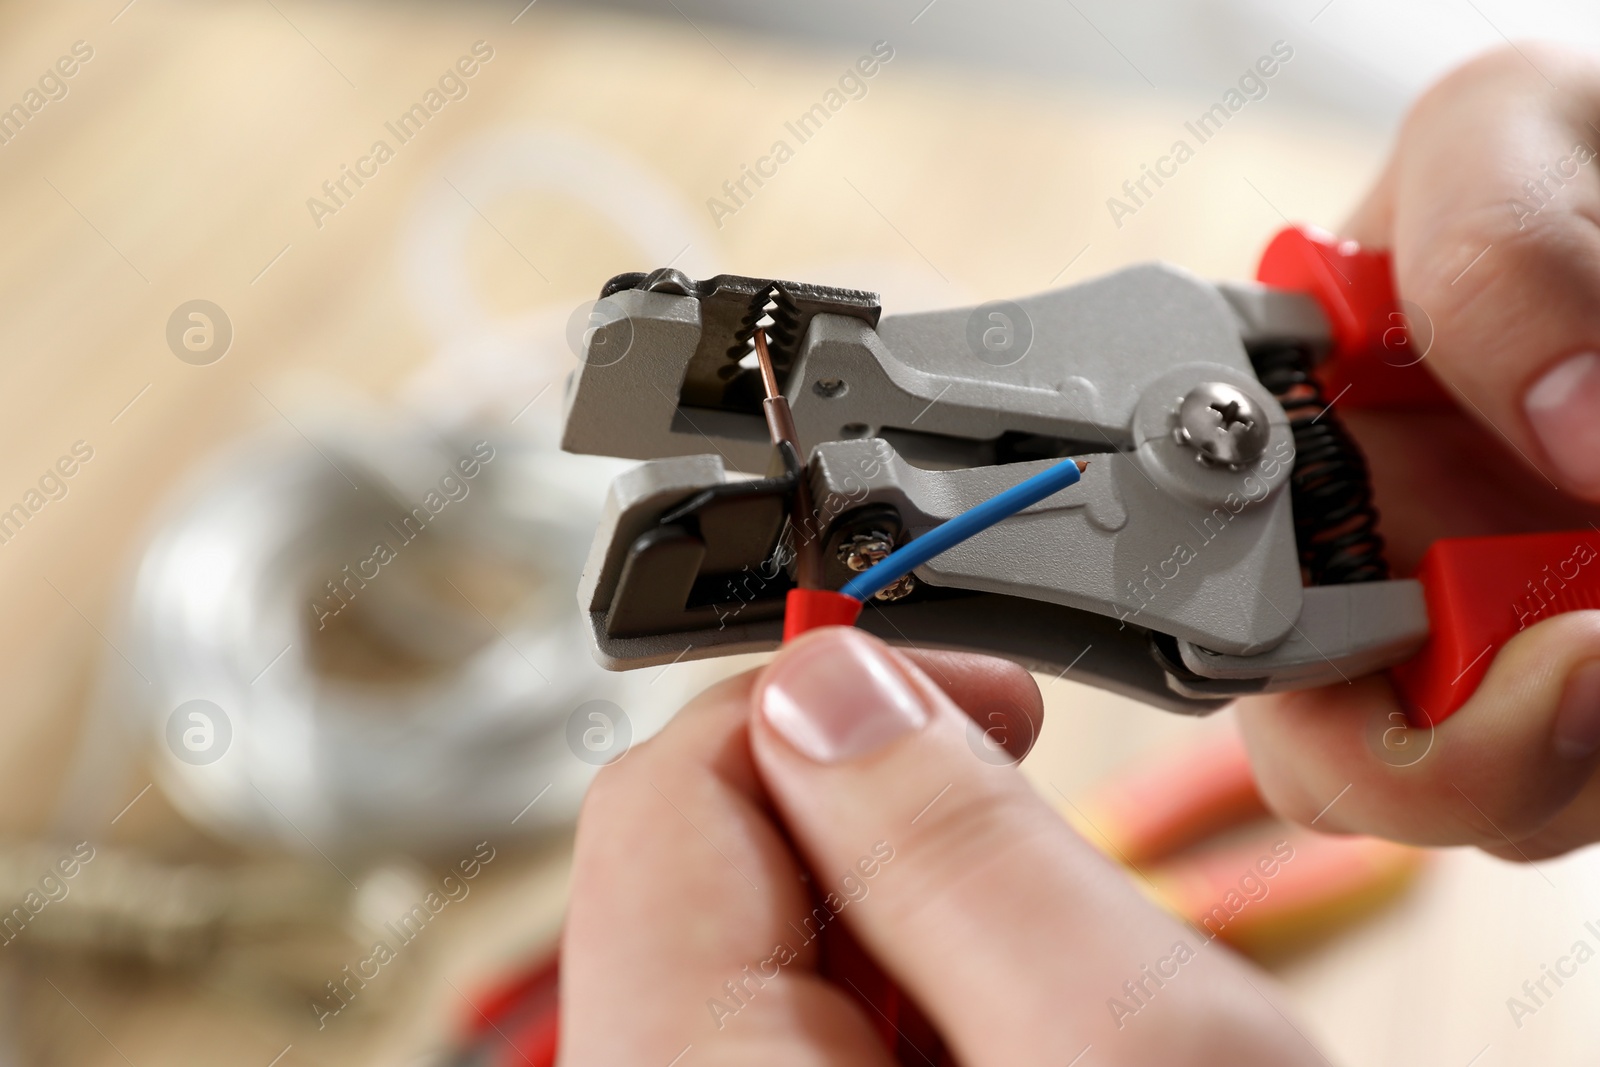 Photo of Professional electrician stripping wiring against blurred background, closeup view